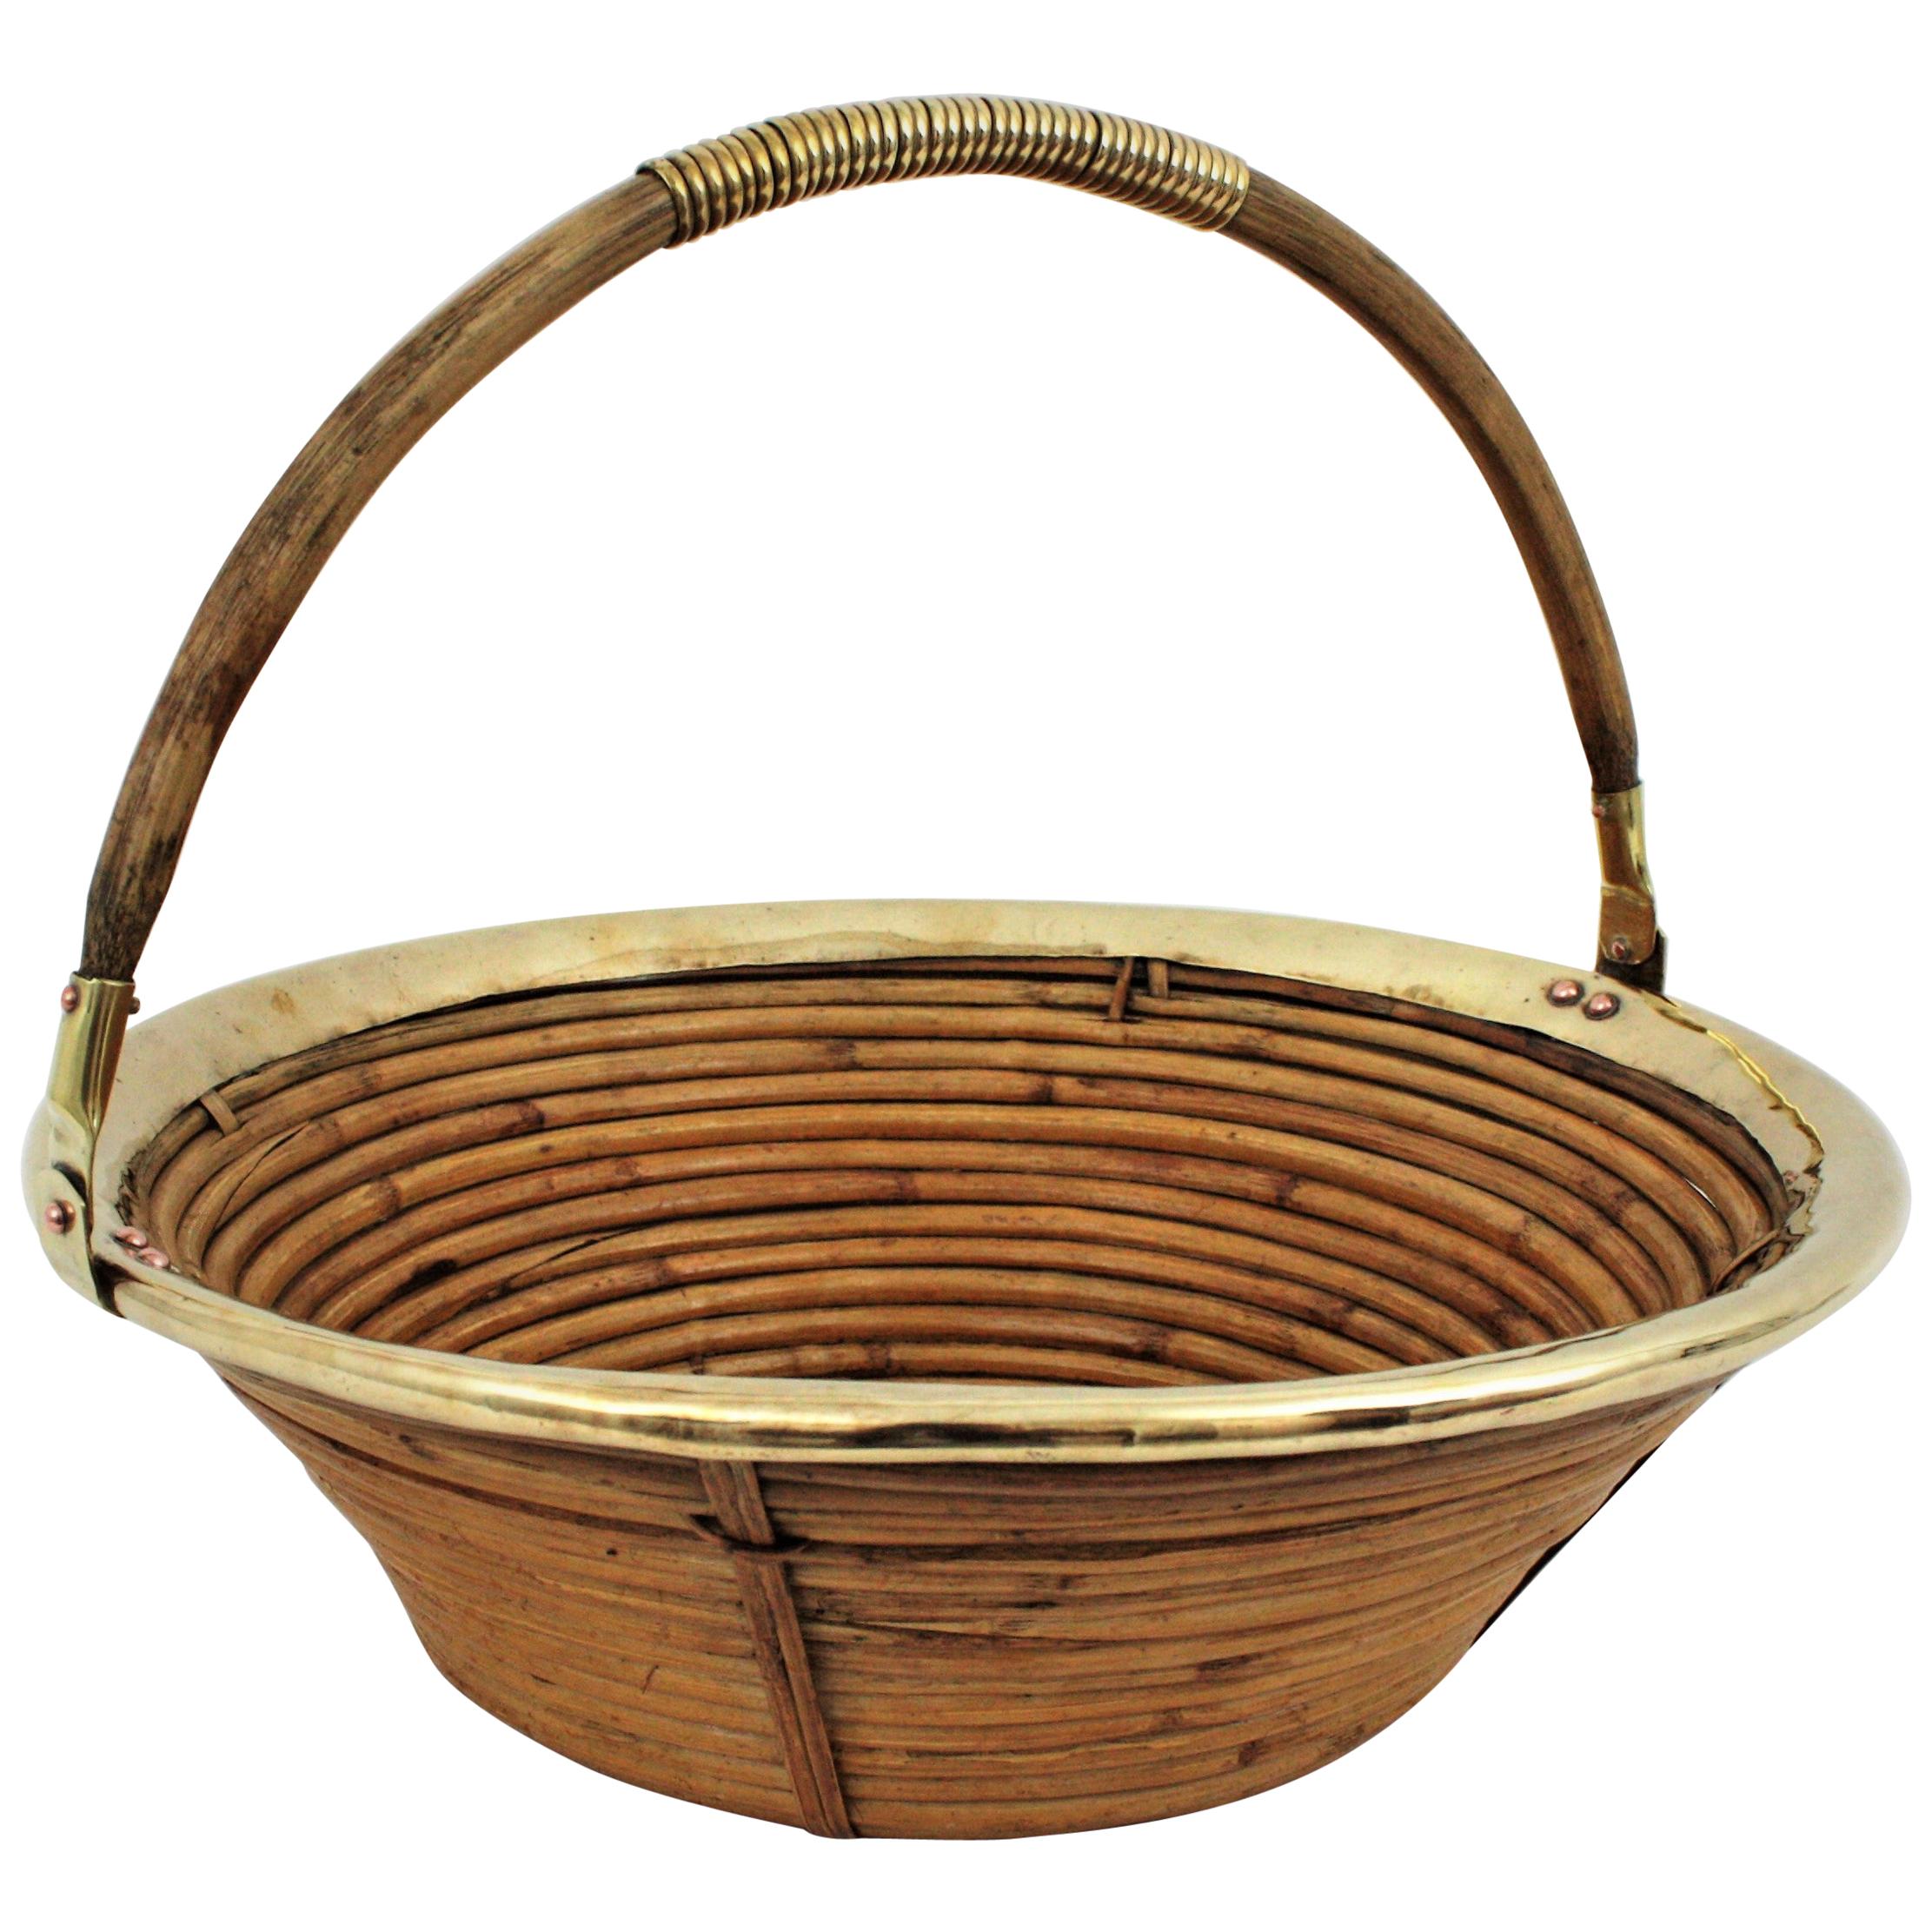 Mid-Century Modern brass and bamboo / rattan large conical basket bowl with a single handle. Handcrafted in Italy, 1970s. 
It has a brass trim covering the top and brass detailings at the handle. Inspired on Gabriella Crespi designs.
Use it as